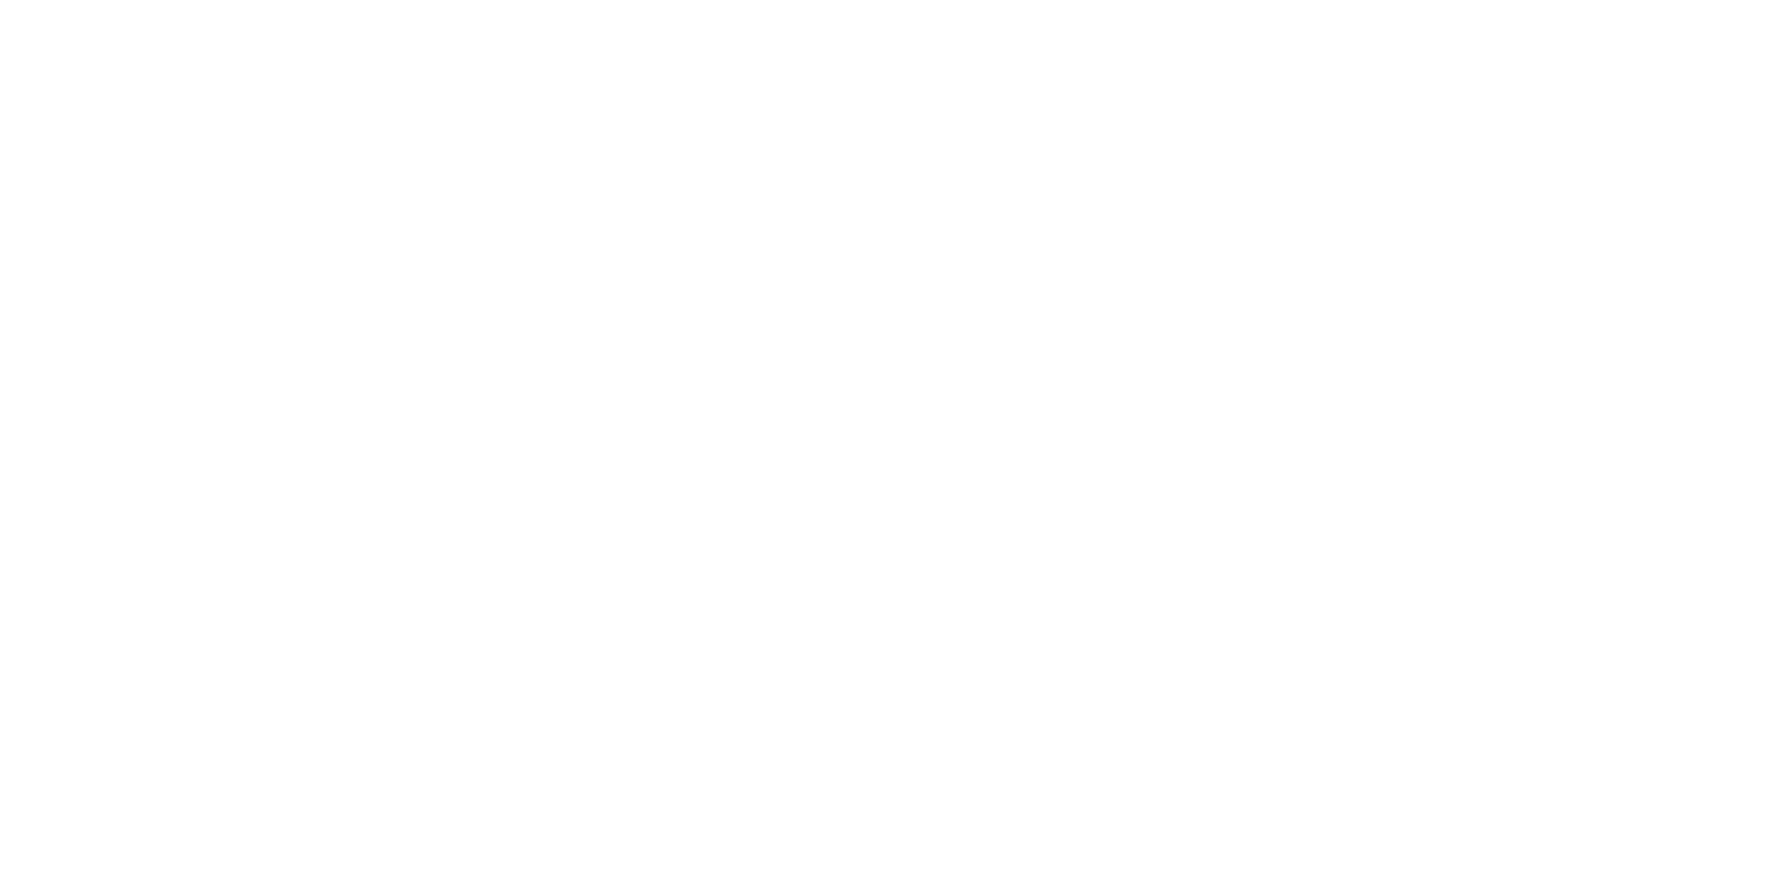 Eckenrod Tax & Accounting Services, LLP